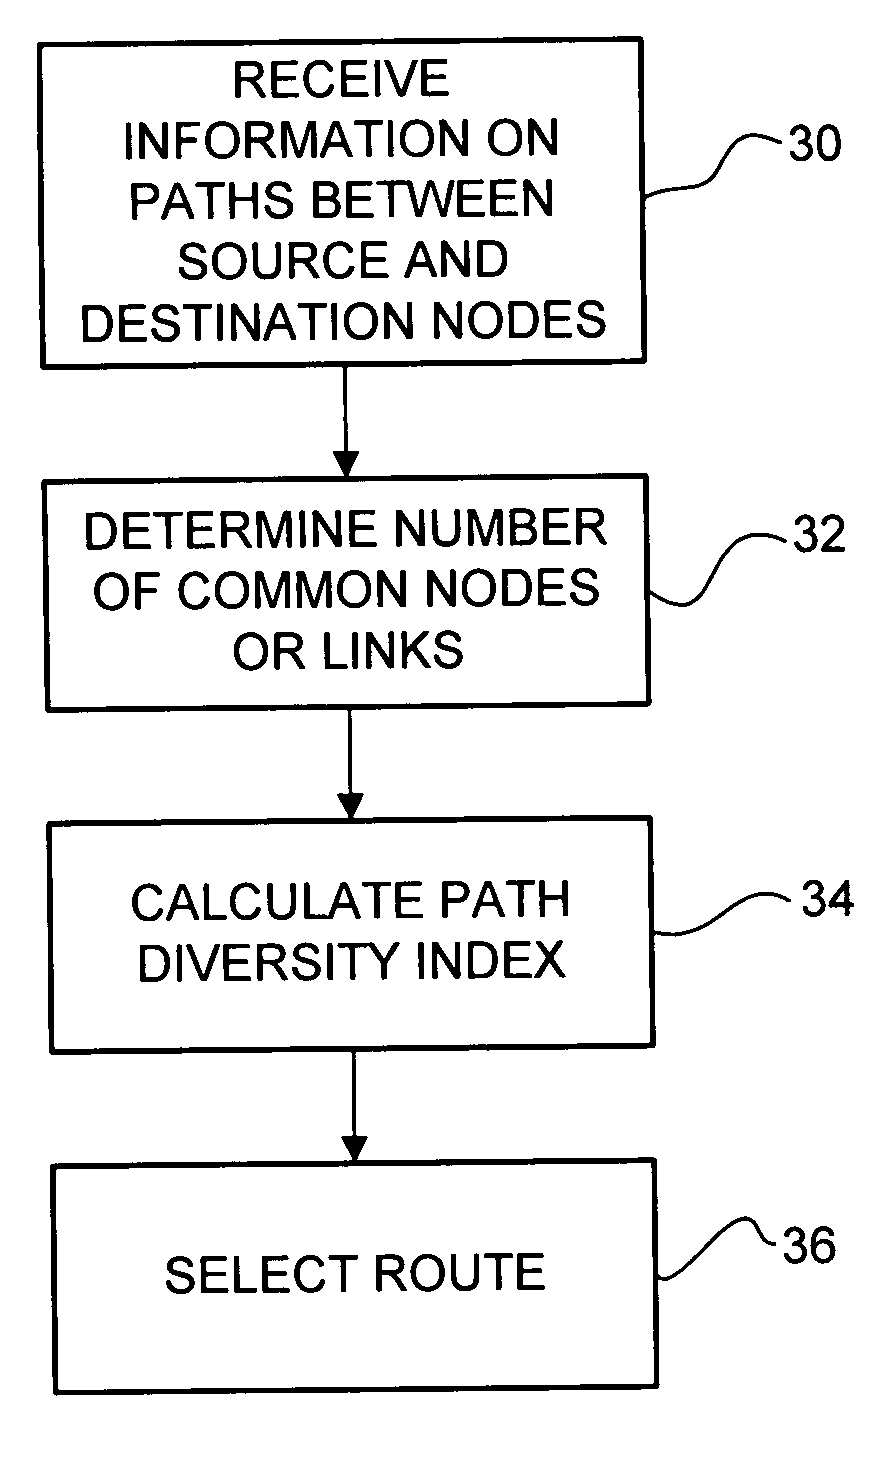 Path diversity index for use in route selection